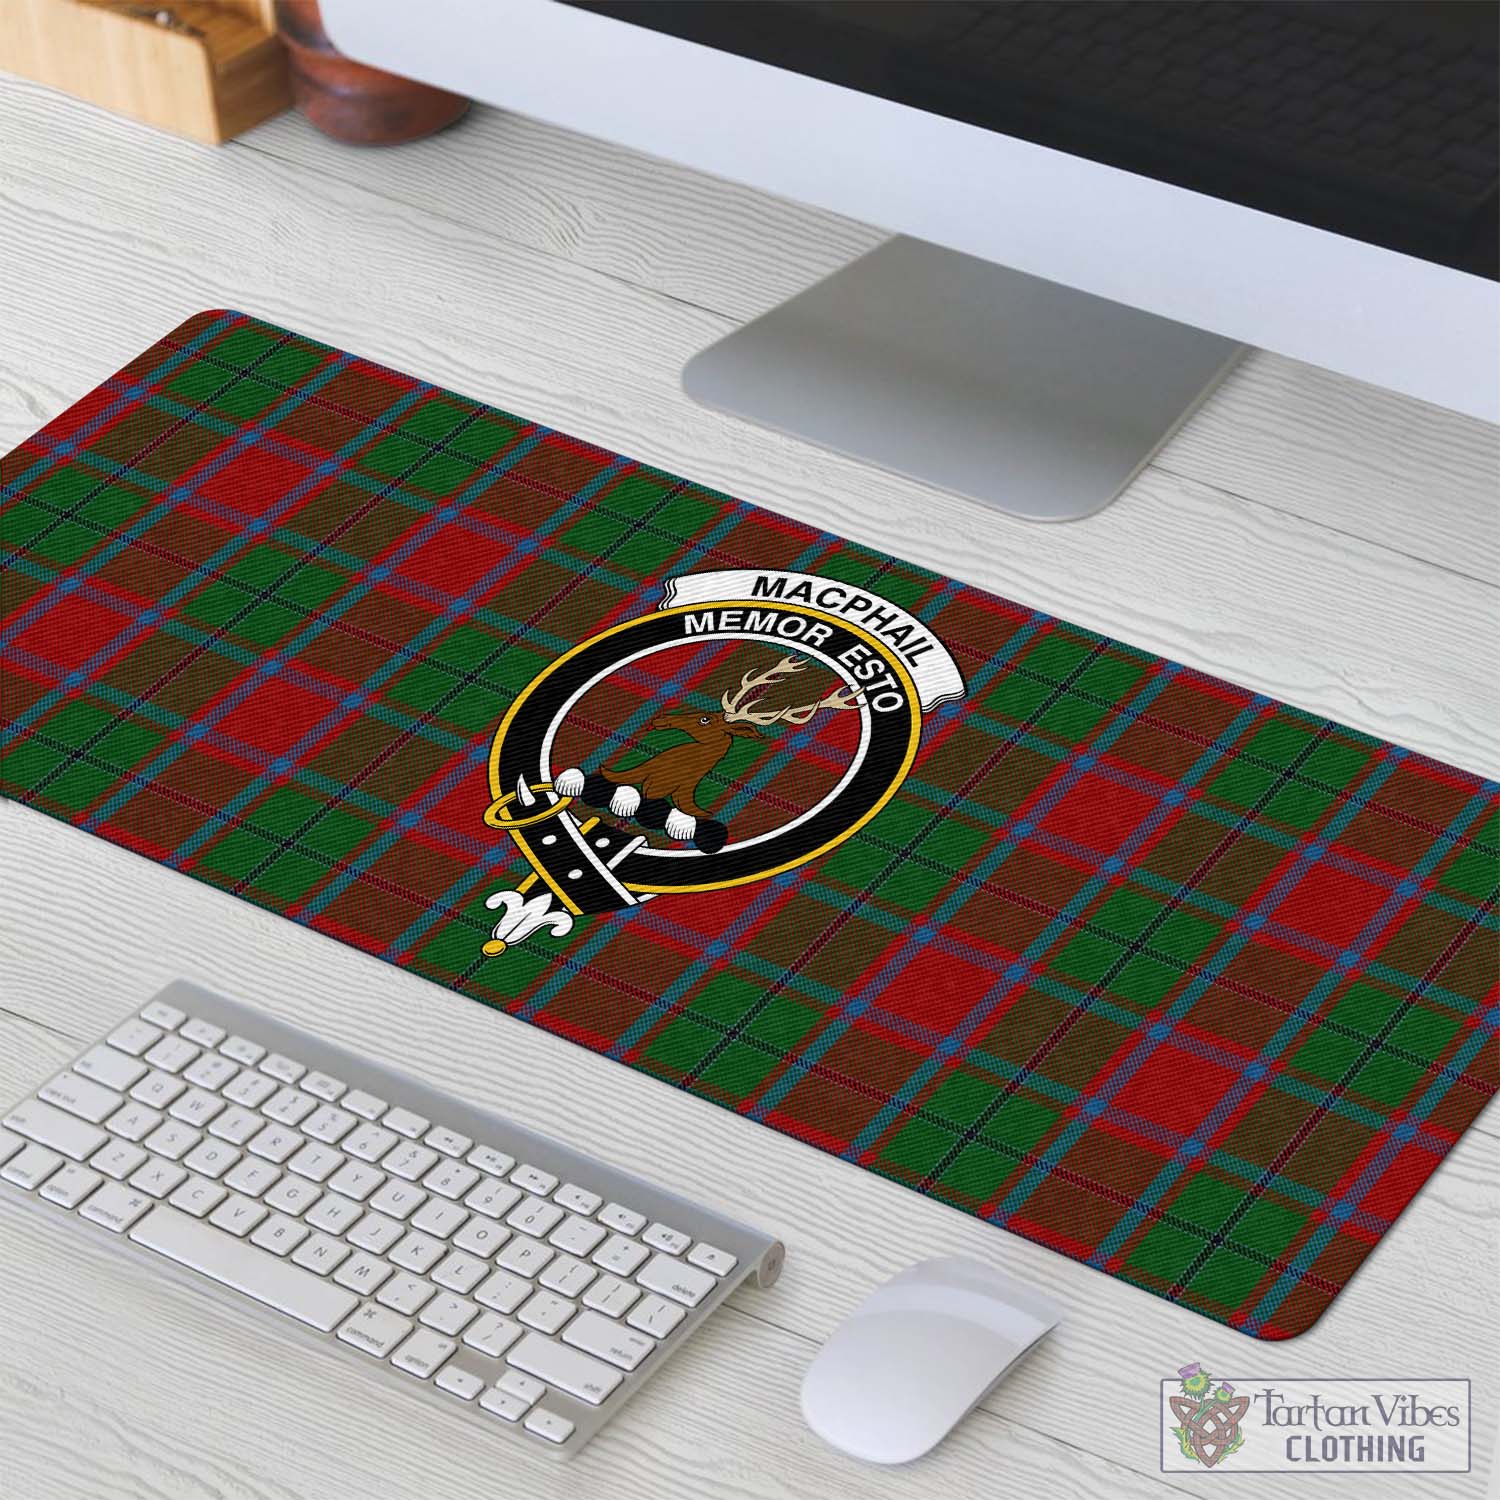 Tartan Vibes Clothing MacPhail Blue Bands Tartan Mouse Pad with Family Crest